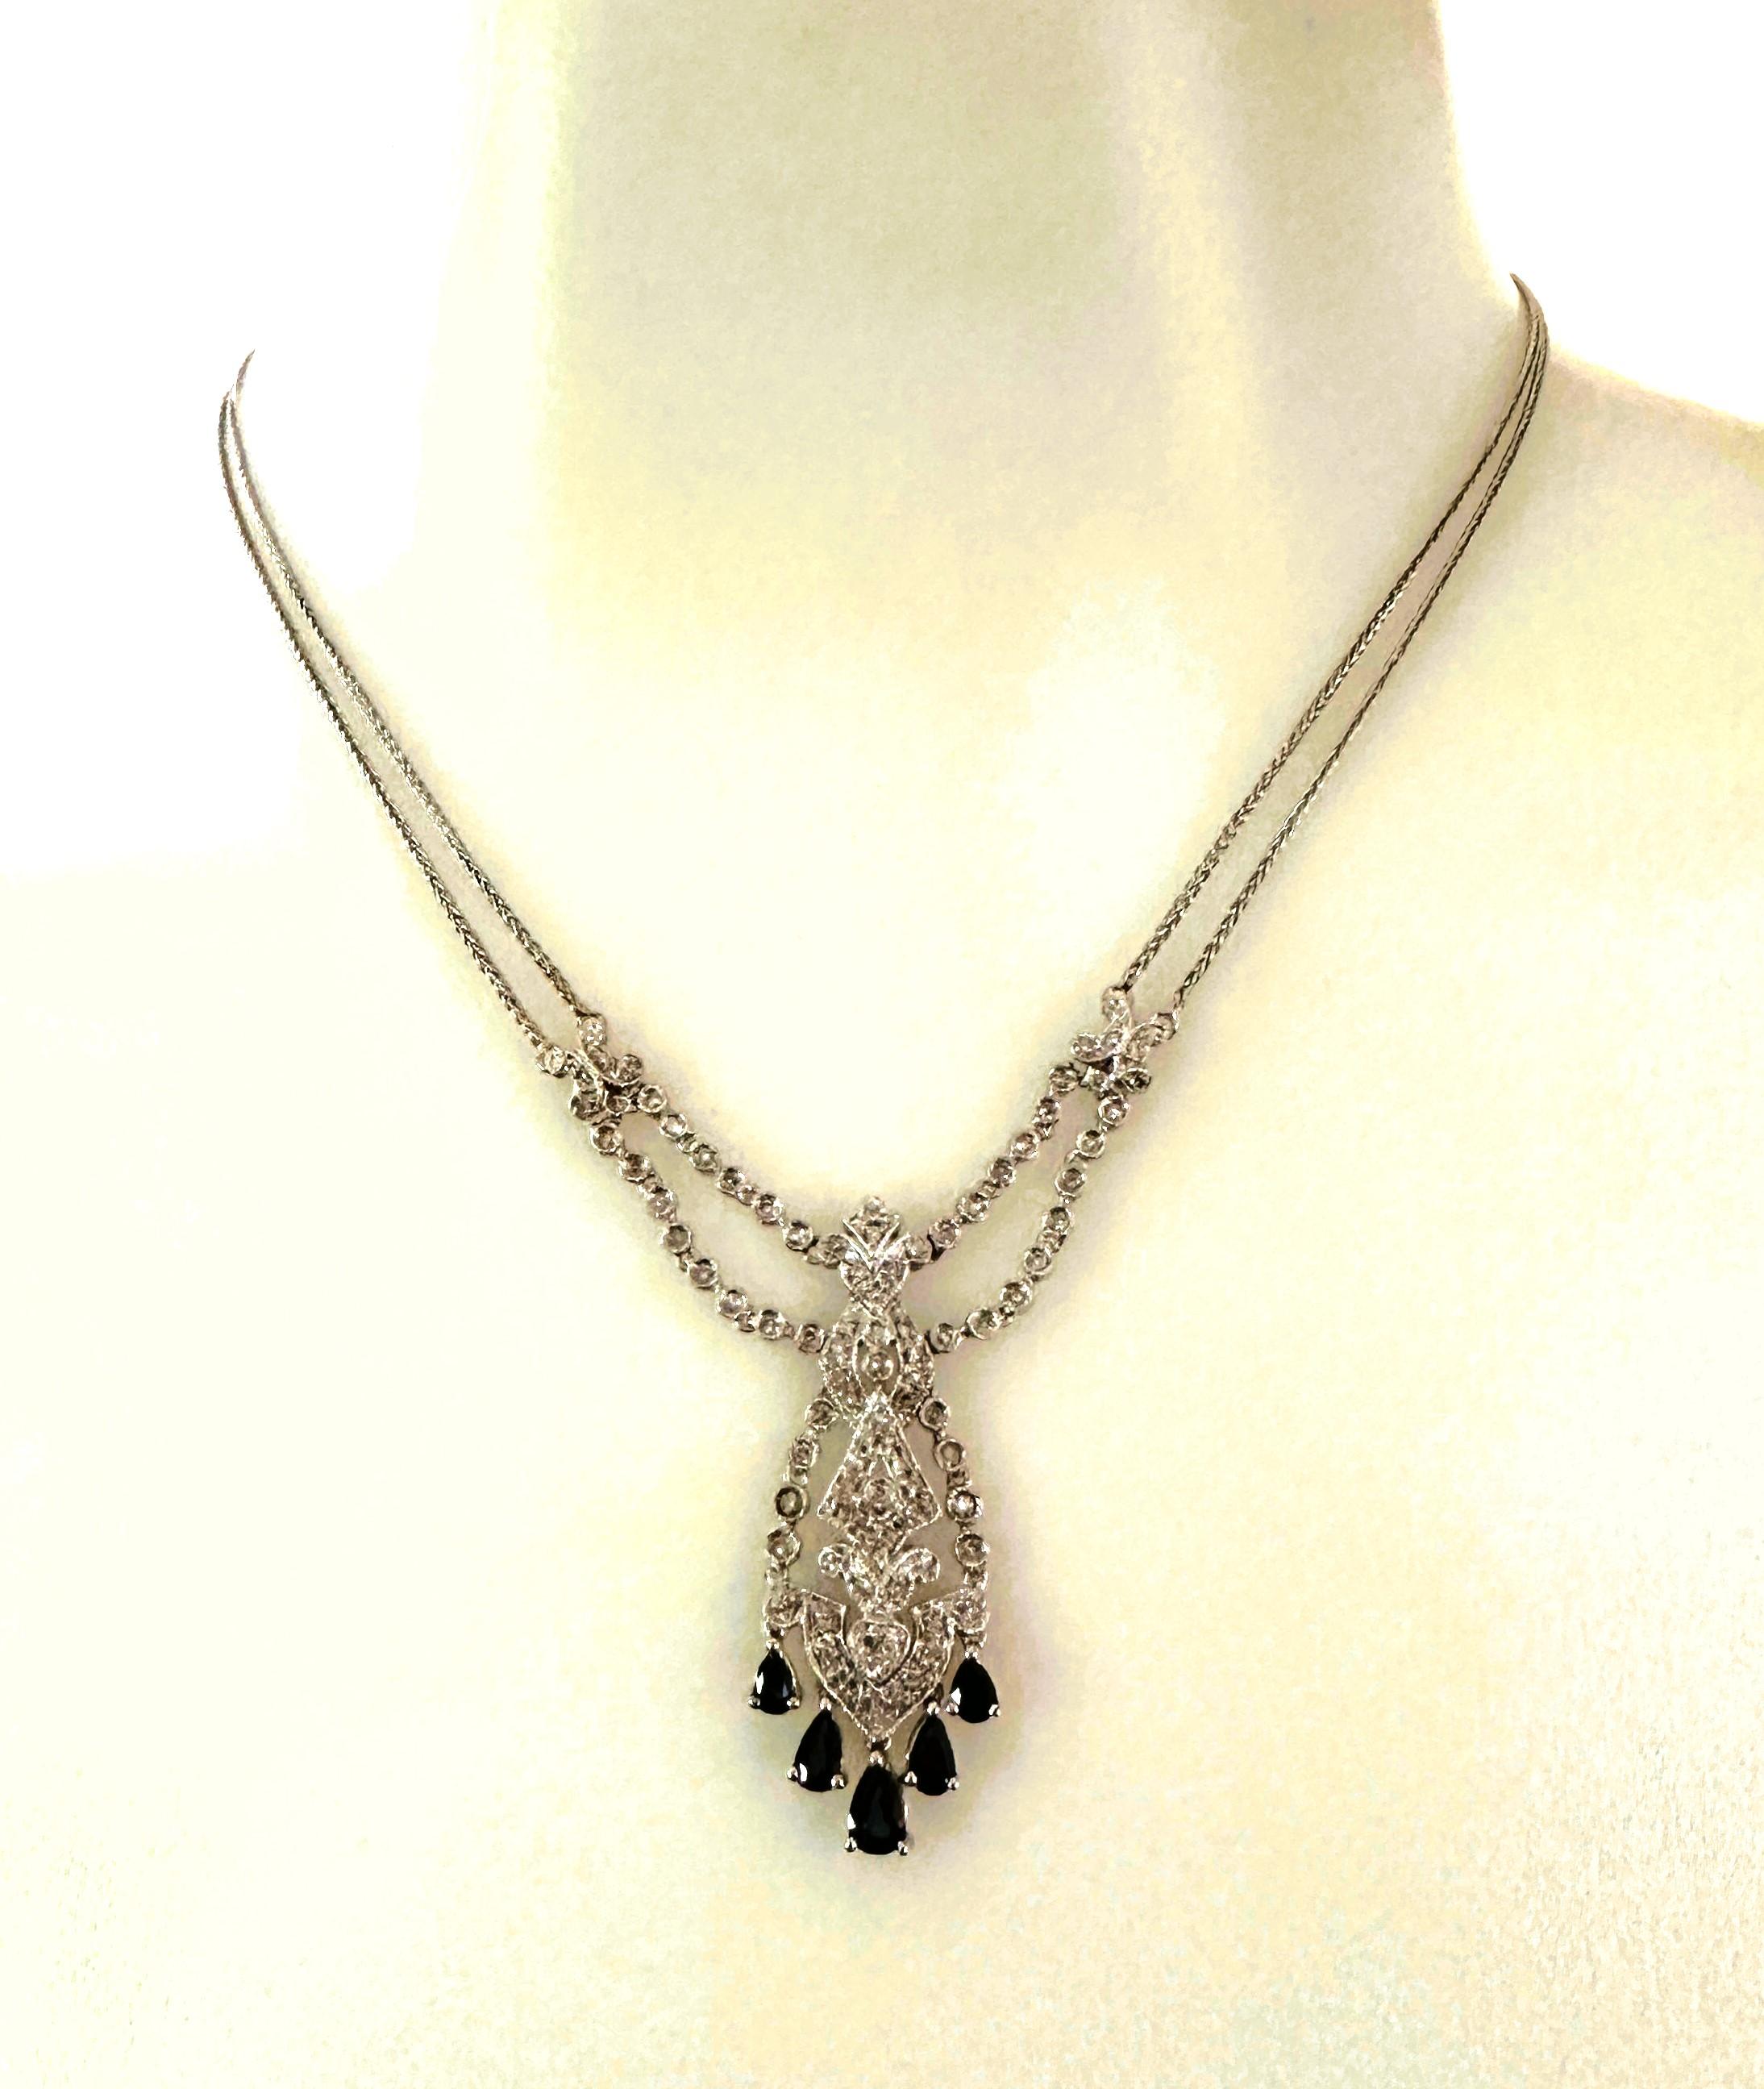 This is just a beautiful pendant necklace.  It's so elegant and hangs beautifully around the neck.  I just love it!  It is pre-owned but in excellent condition.  All together it has 92 diamond and 5 sapphires.  I've attached a copy of the appraisal